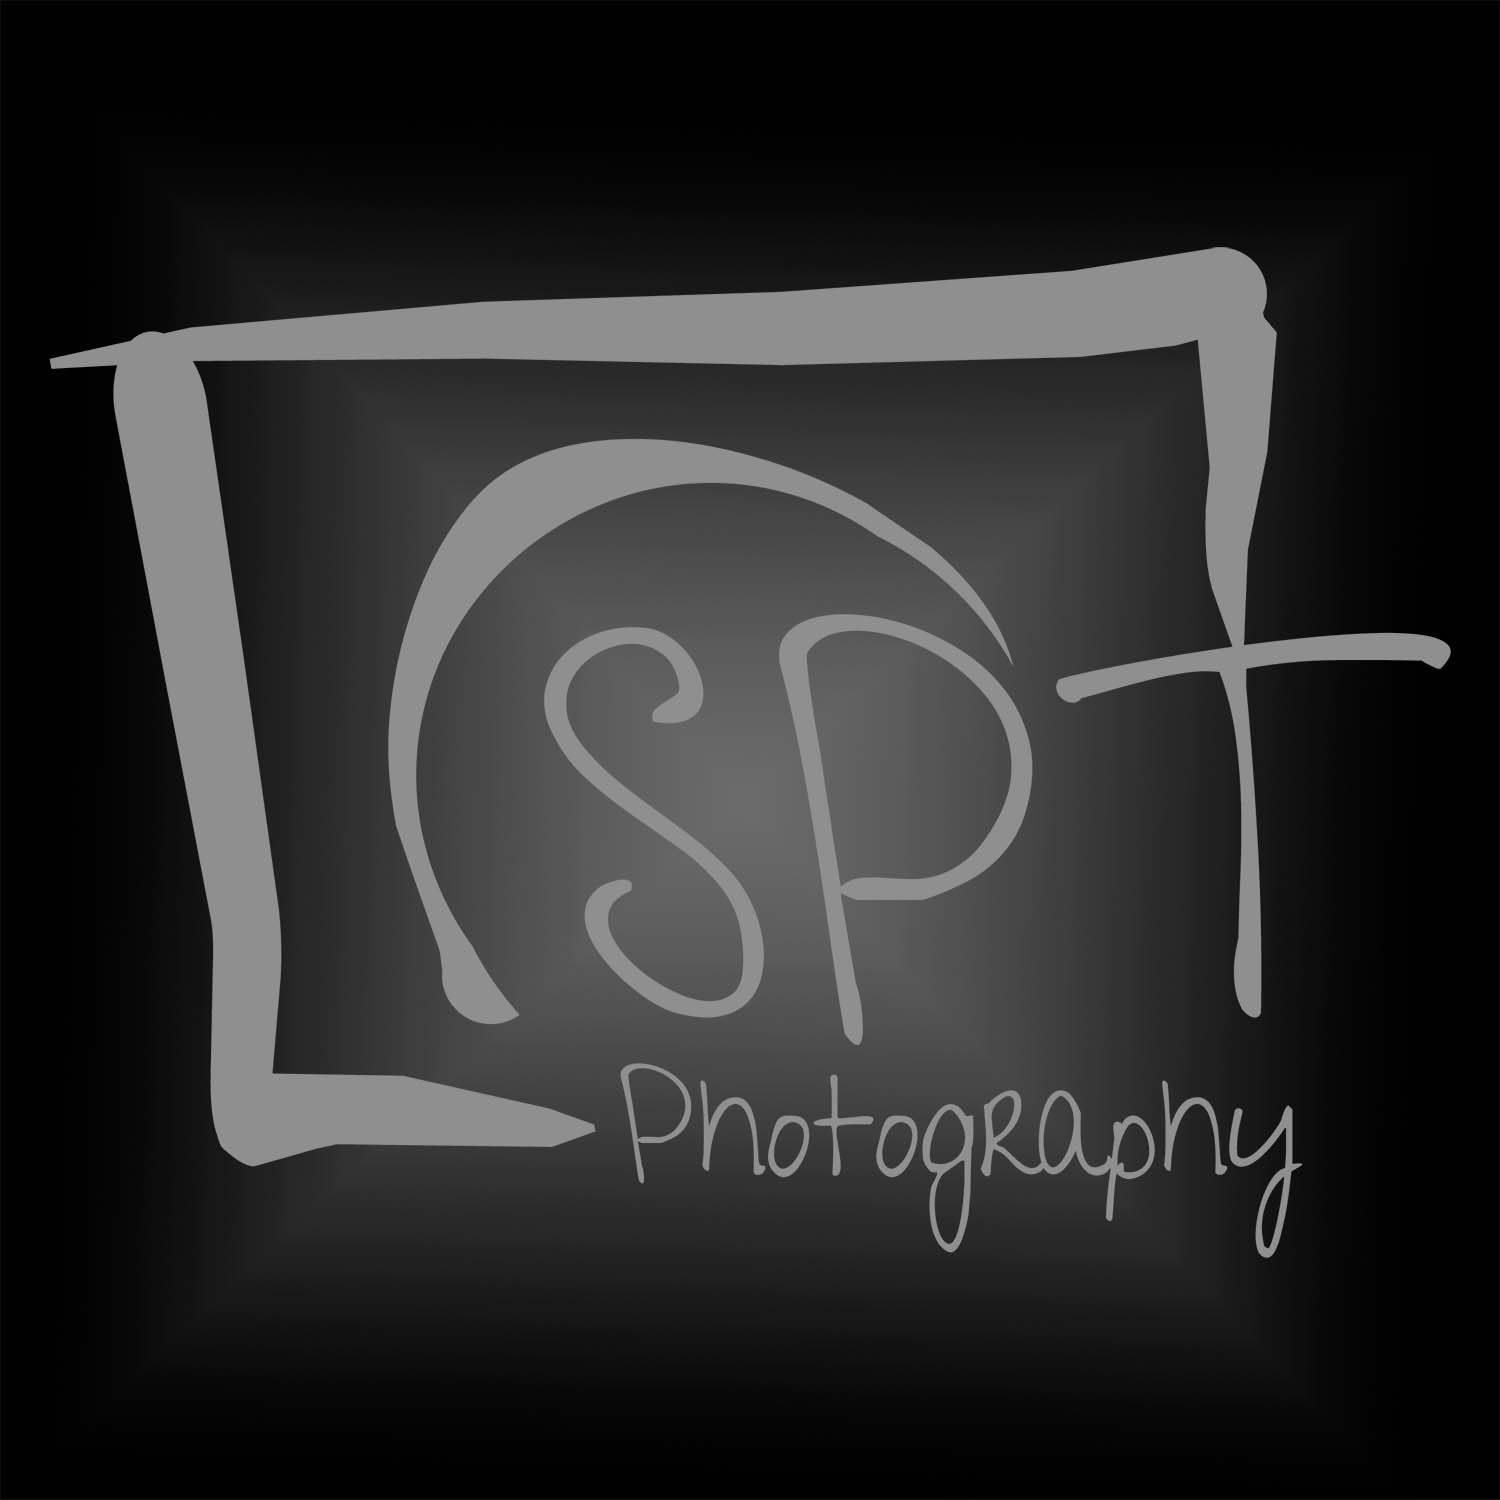 SPT Photography